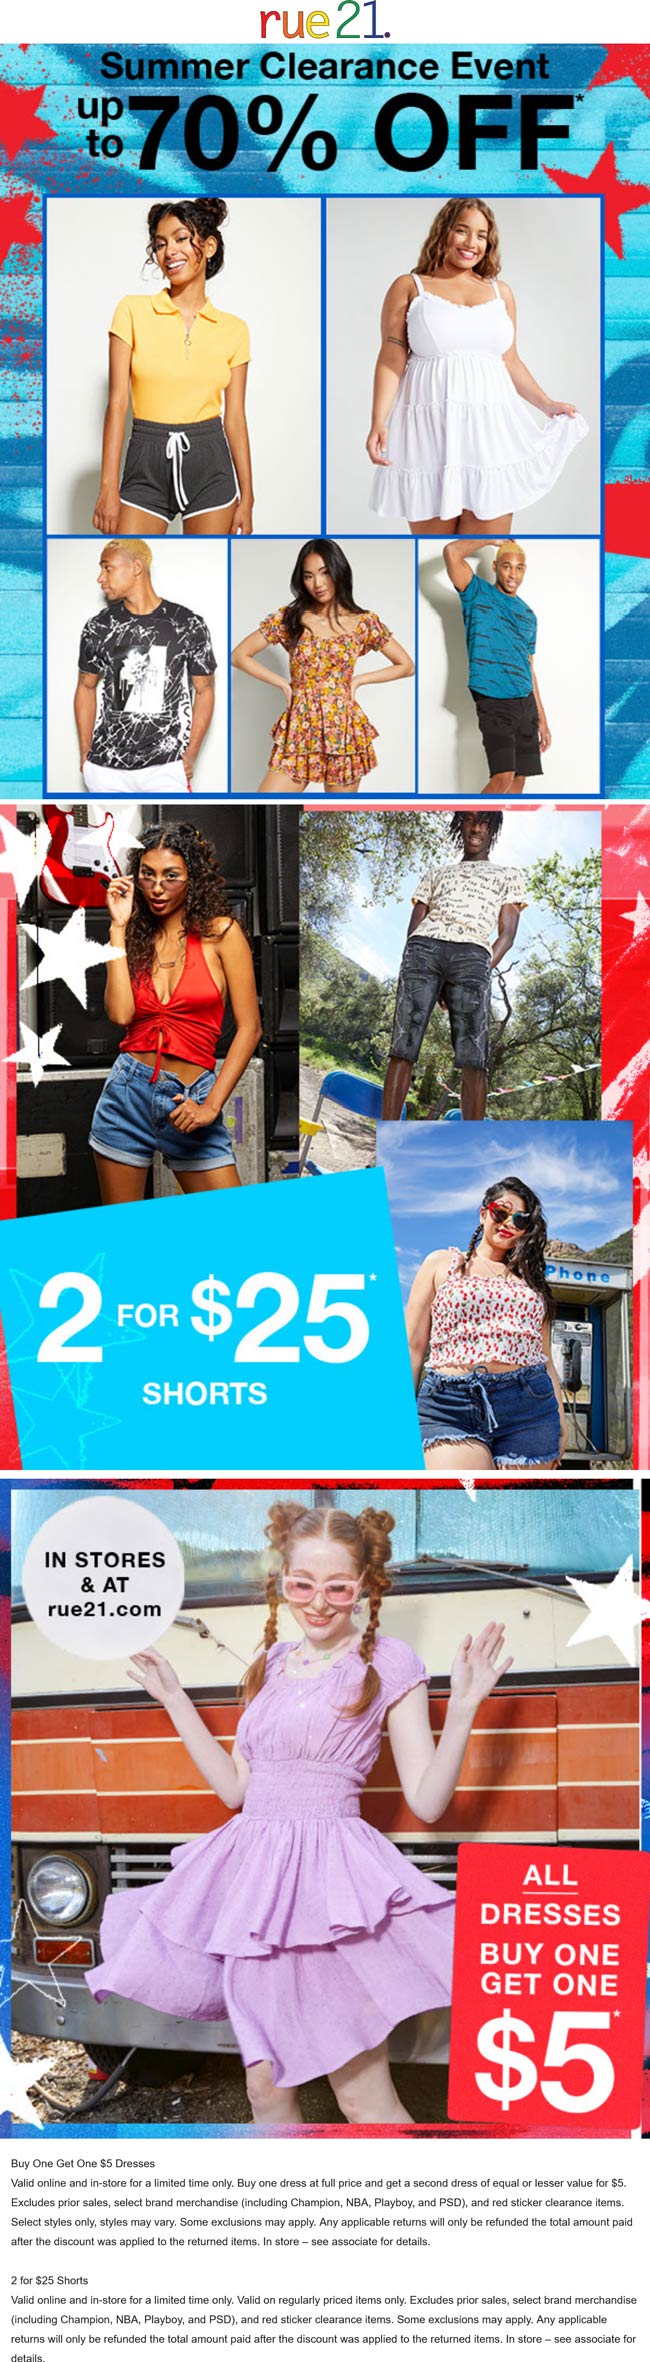 rue21 stores Coupon  Second dress $5 & 2 shorts for $25 at rue21 #rue21 